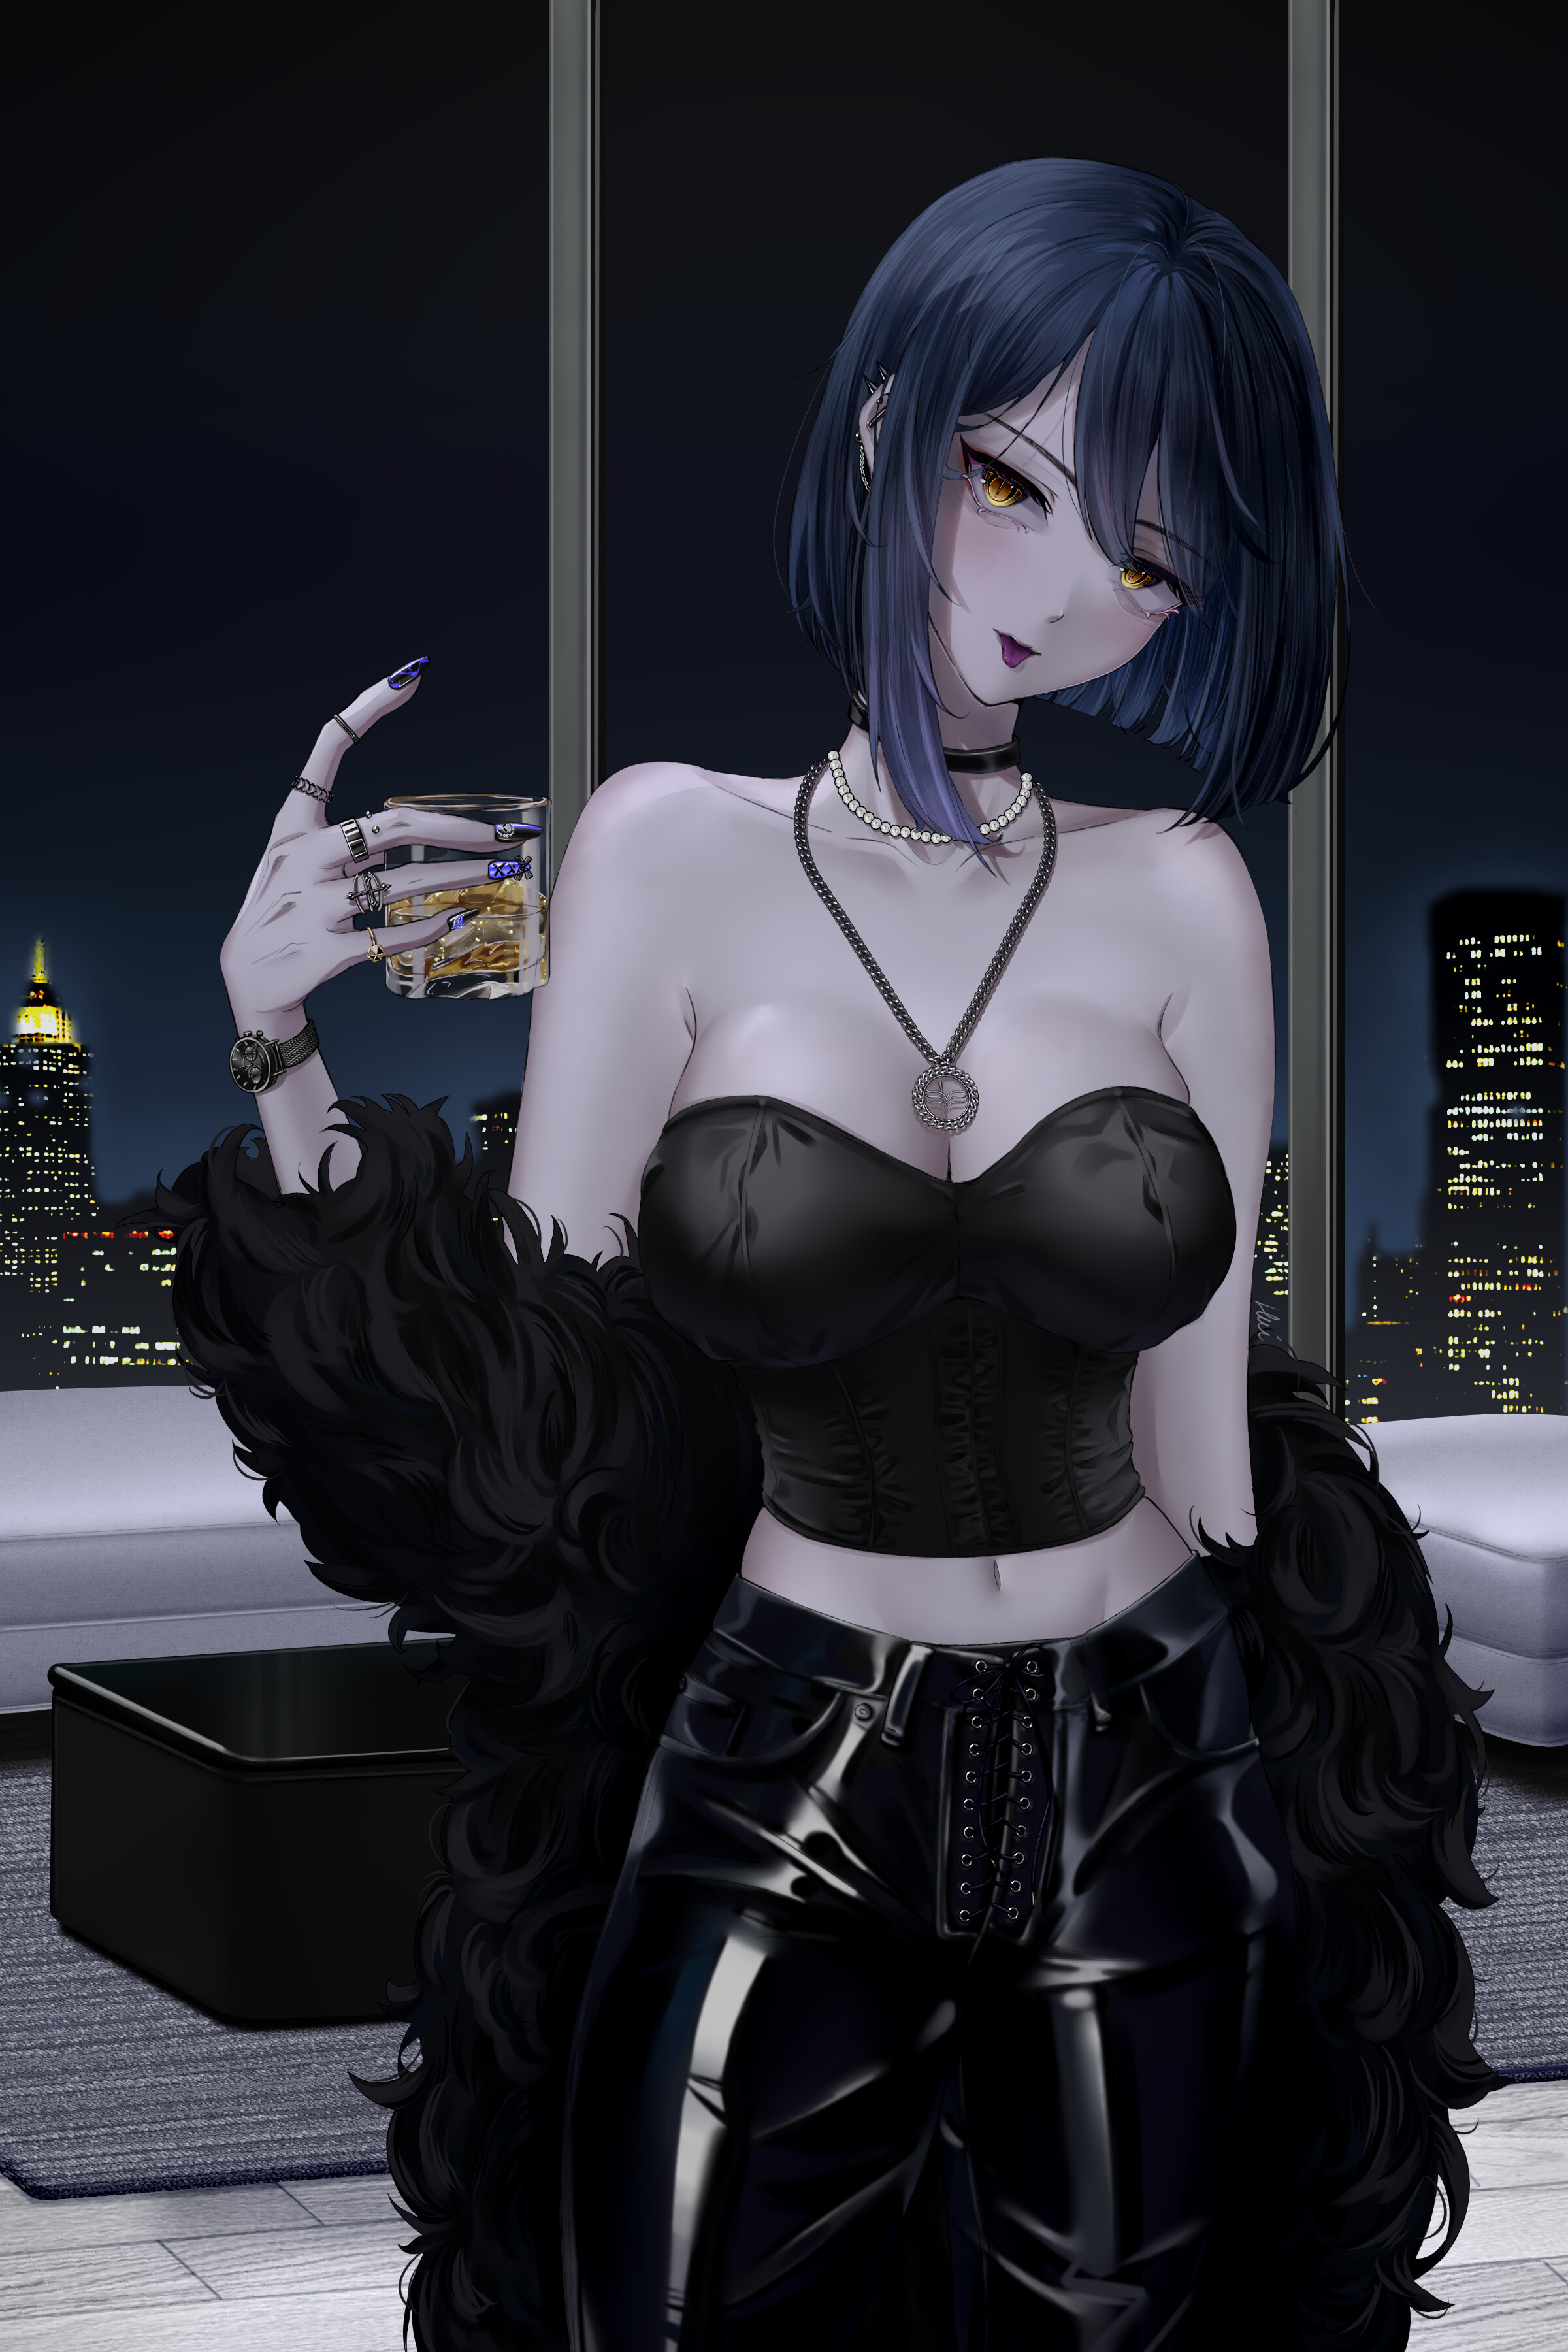 Anime 2400x3600 strapless bras anime girls portrait display necklace pearls drink alcohol tongue out city lights city